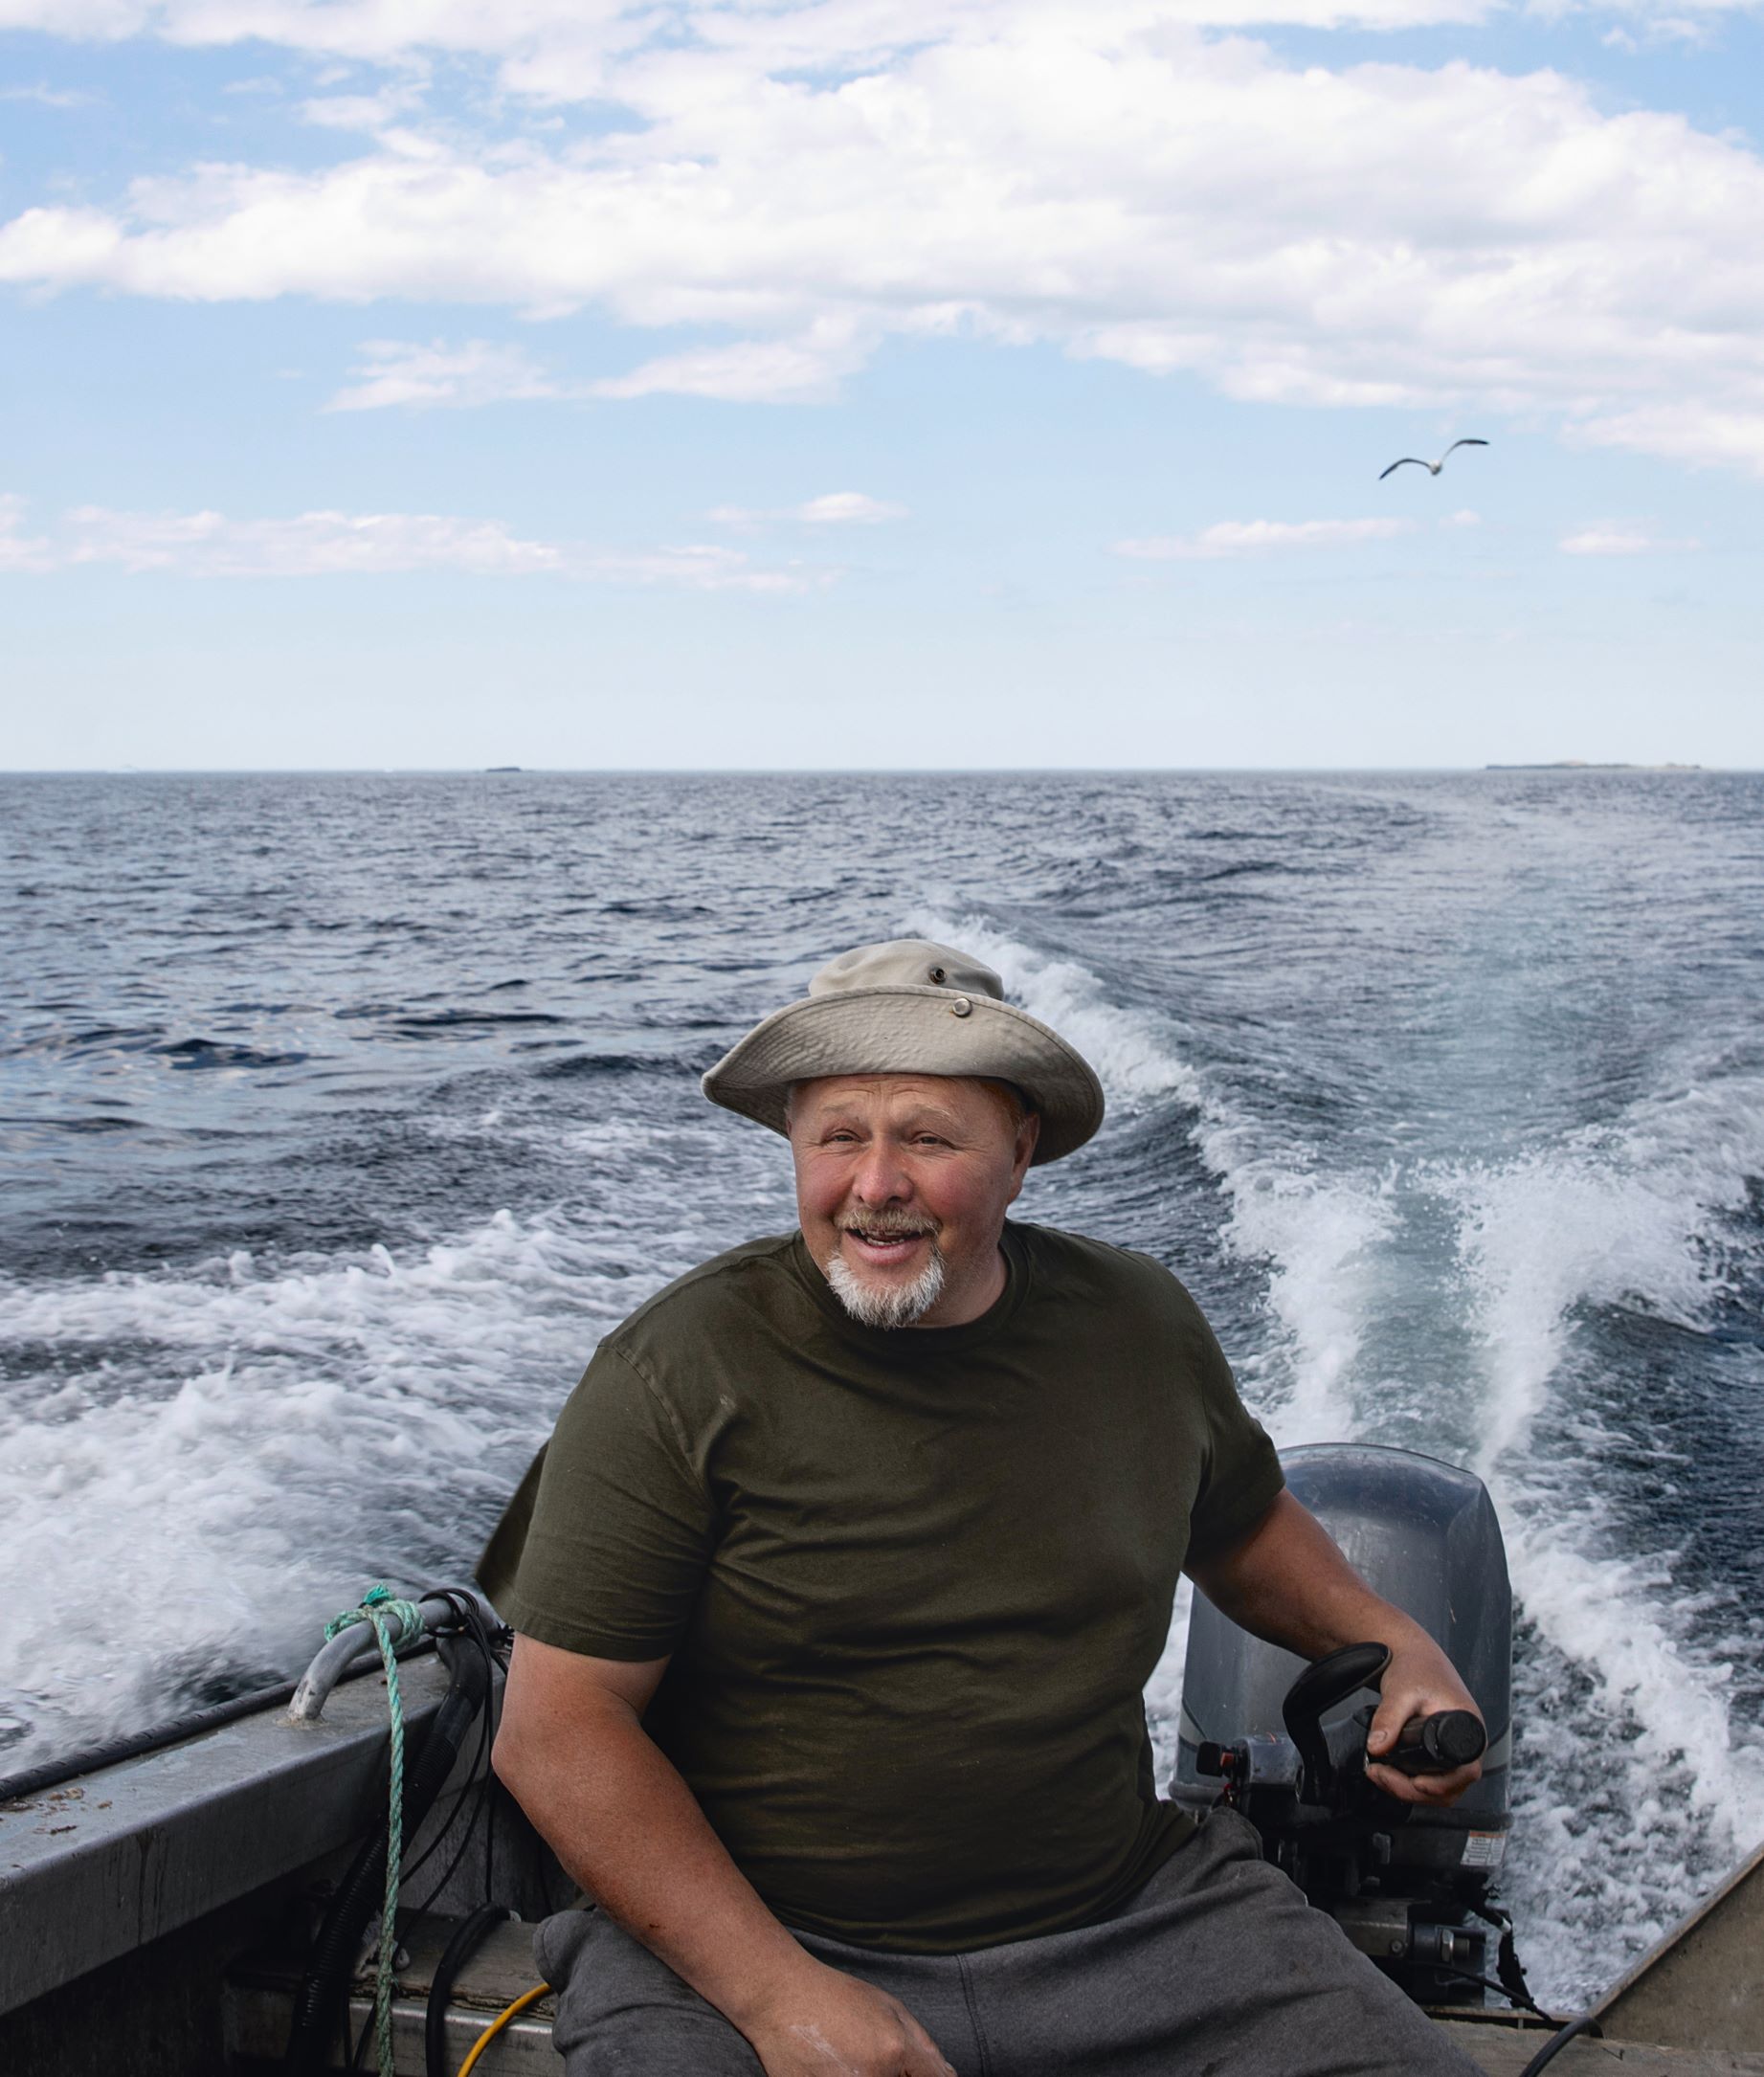 Bayman Jerry Hussey, as featured in Wildness: An Ode to Newfoundland and Labrador by Jeremy Charles